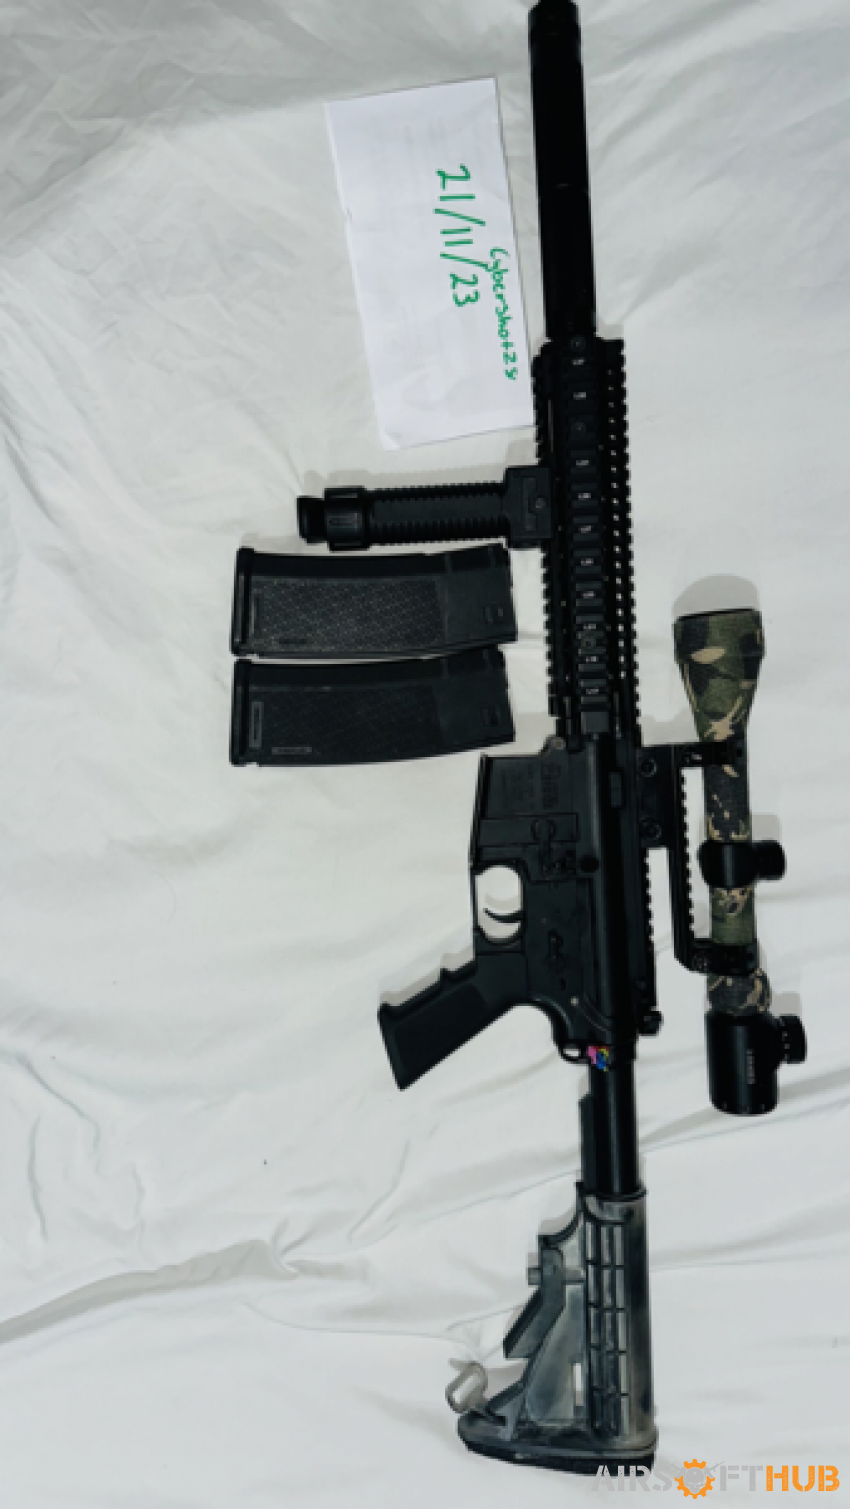 Mk18 DMR - Used airsoft equipment